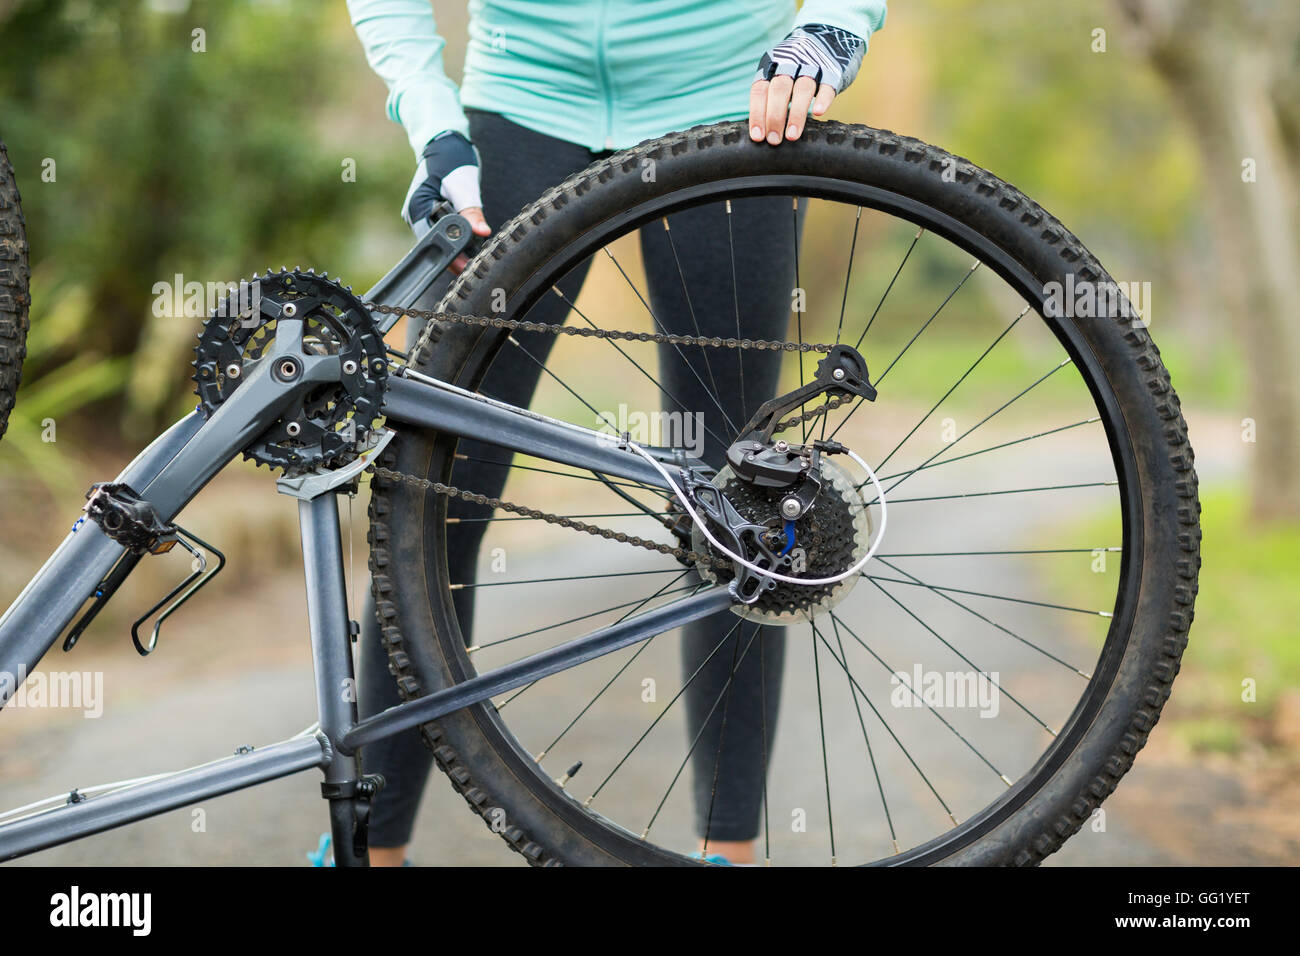 Mid section of woman repairing bicycle tyre Stock Photo